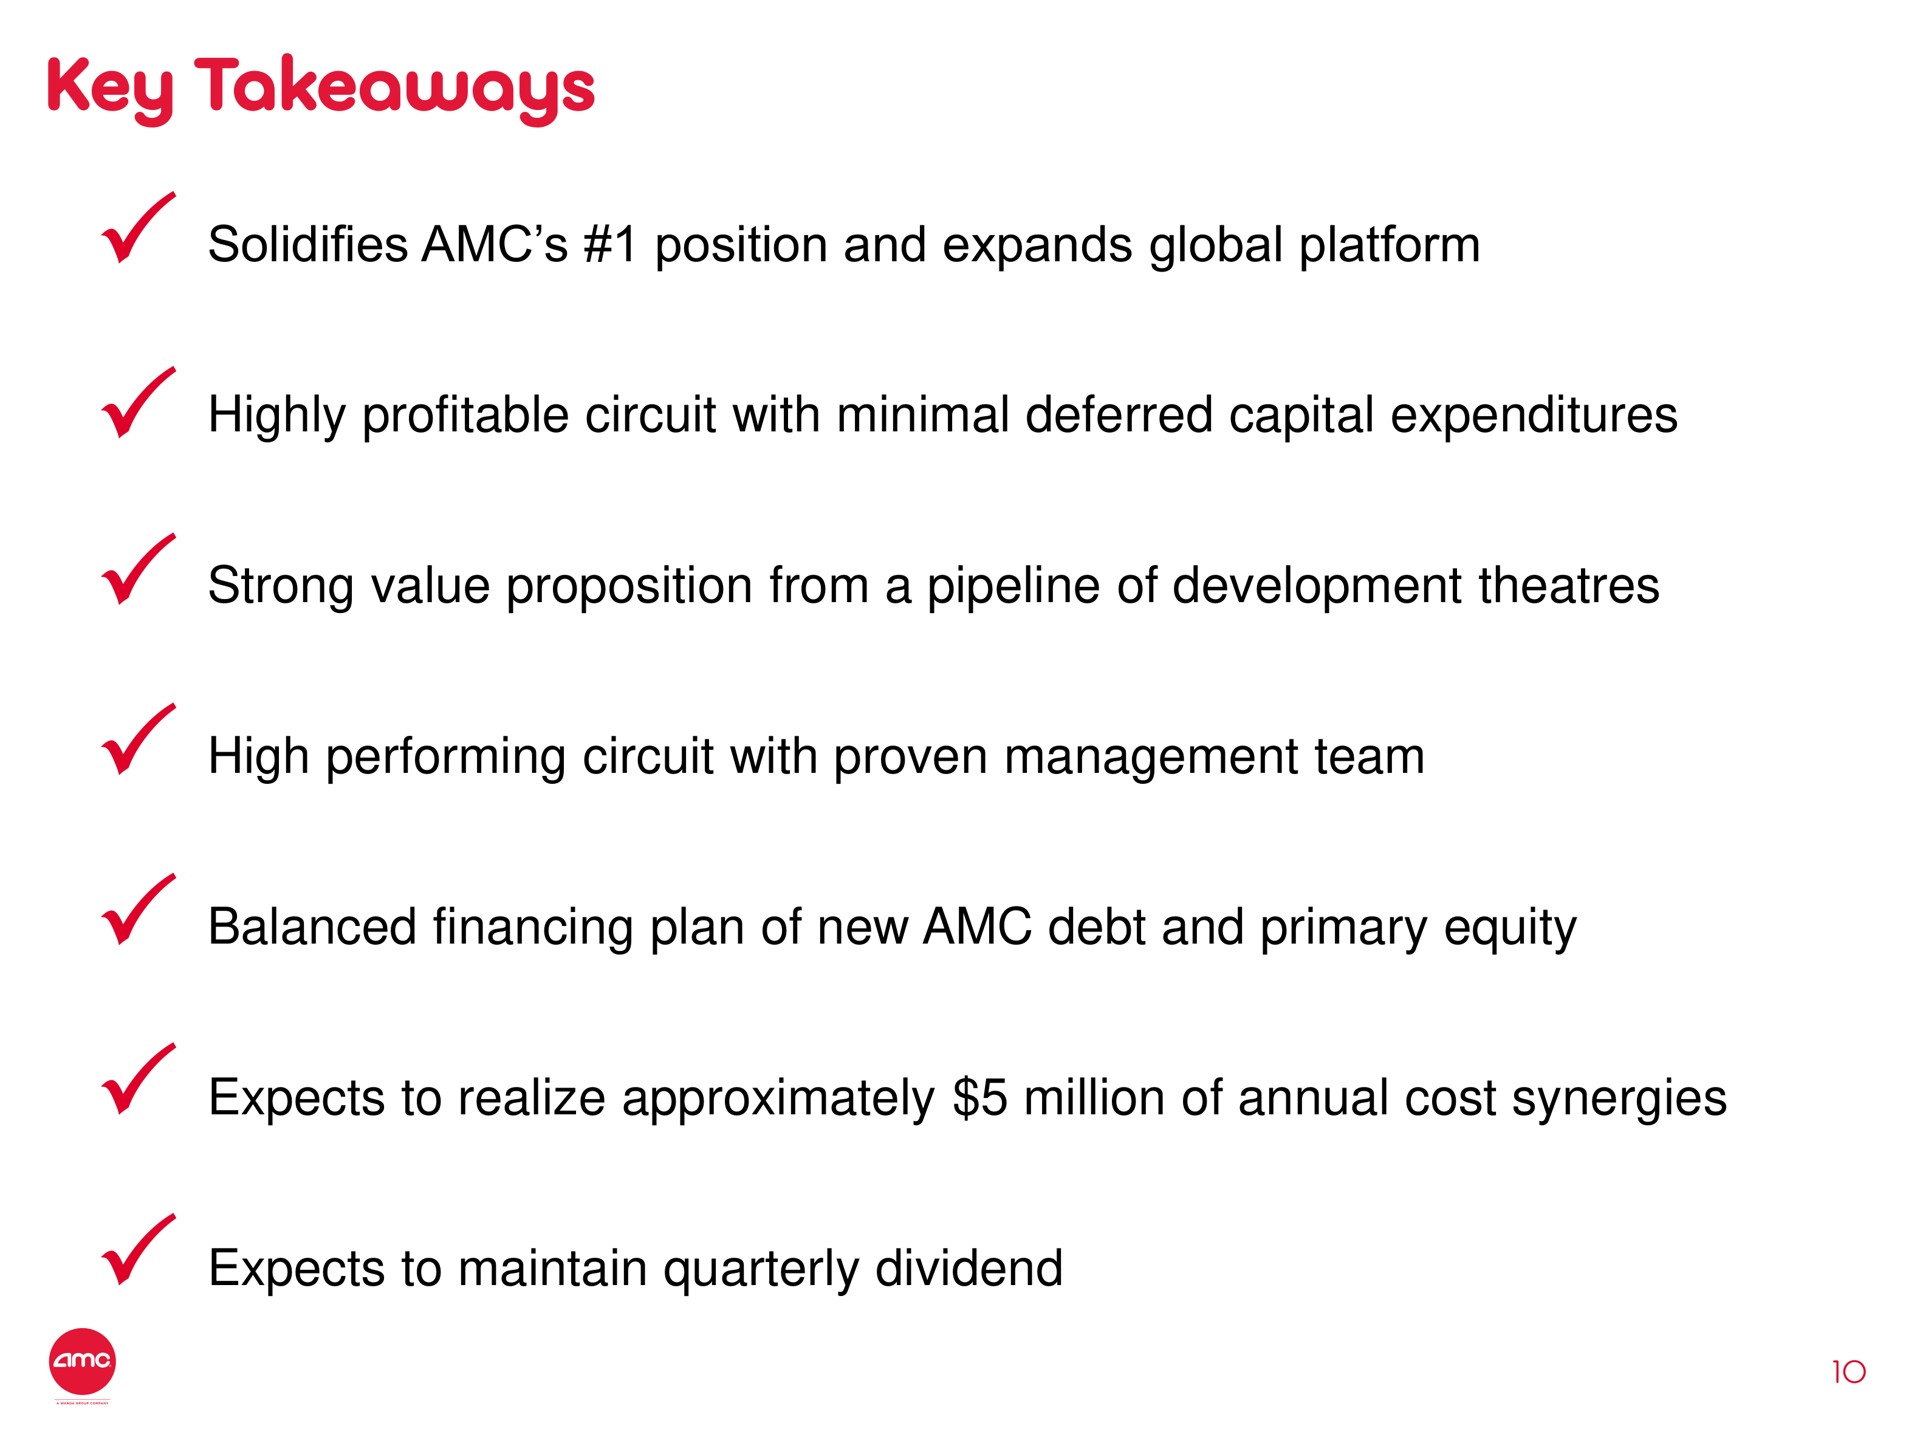 key solidifies position and expands global platform highly profitable circuit with minimal deferred capital expenditures strong value proposition from a pipeline of development high performing circuit with proven management team balanced financing plan of new debt and primary equity expects to realize approximately million of annual cost synergies expects to maintain quarterly dividend | AMC